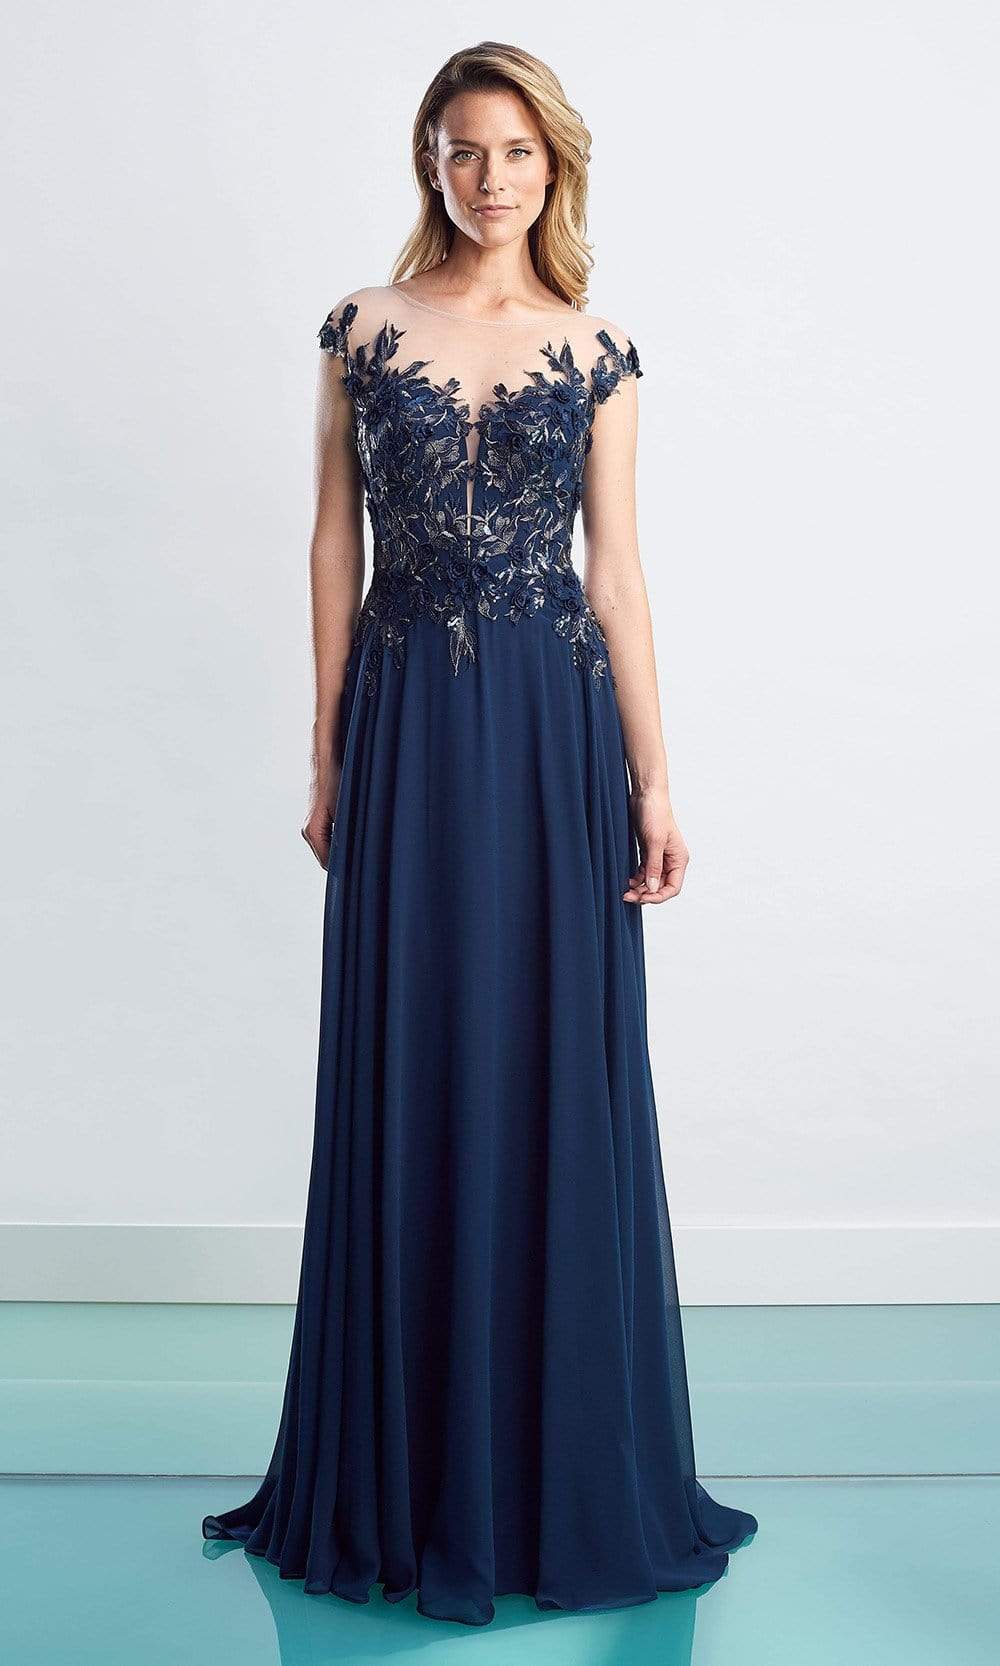 Alexander By Daymor - 1452 Floral Embroidered Chiffon Gown Evening Dresses 4 / Navy